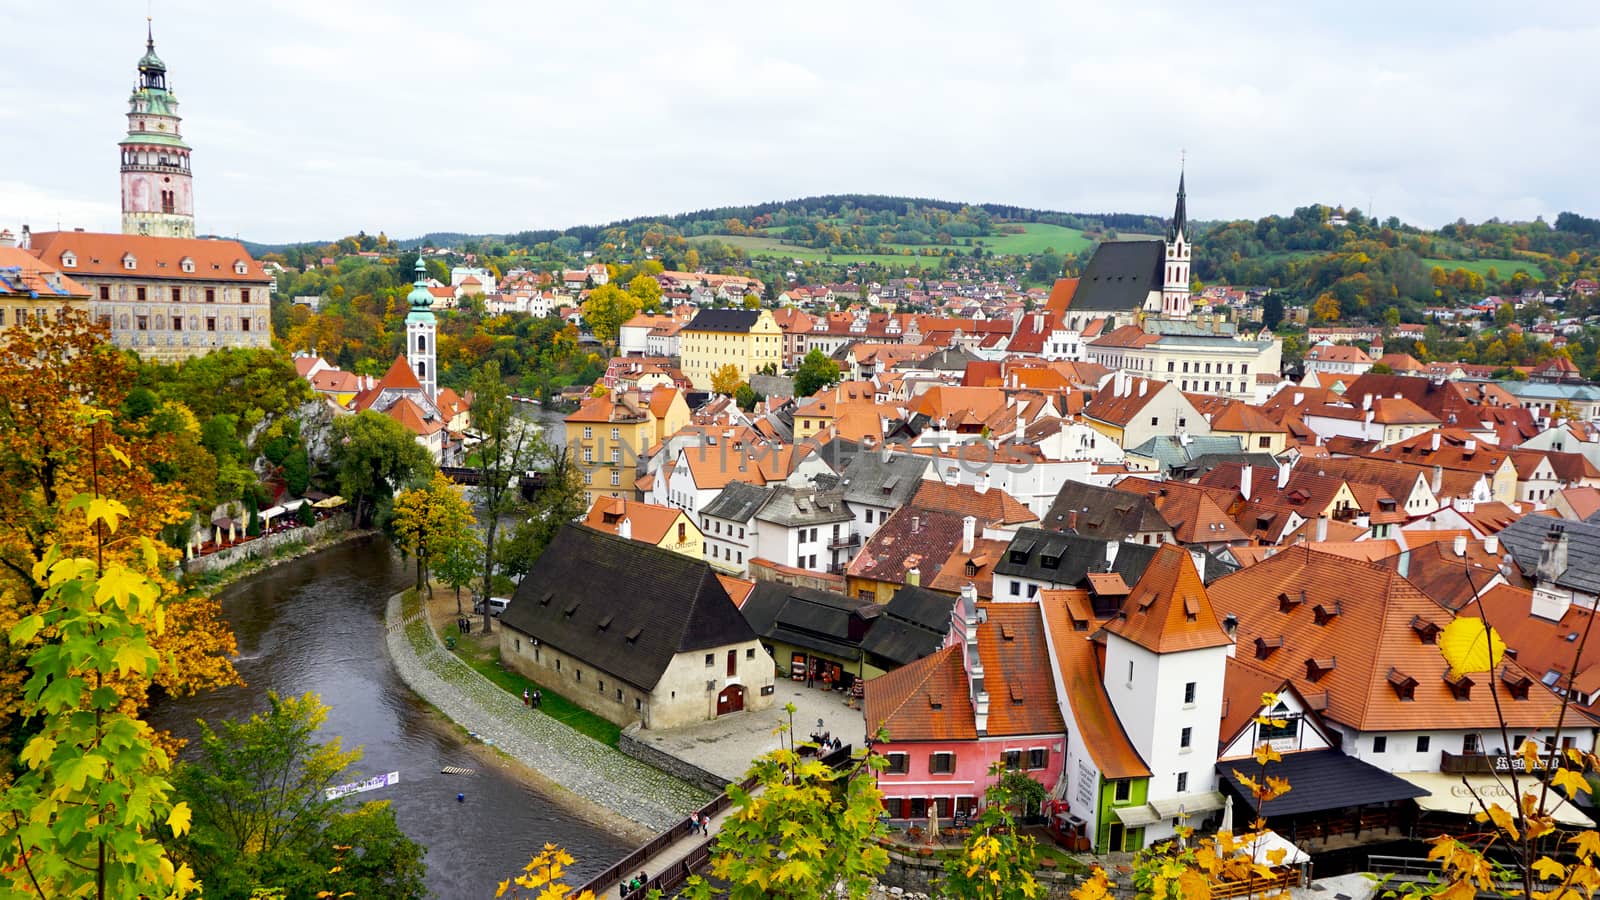 Cesky Krumlov oldtown city and river view in Autumn